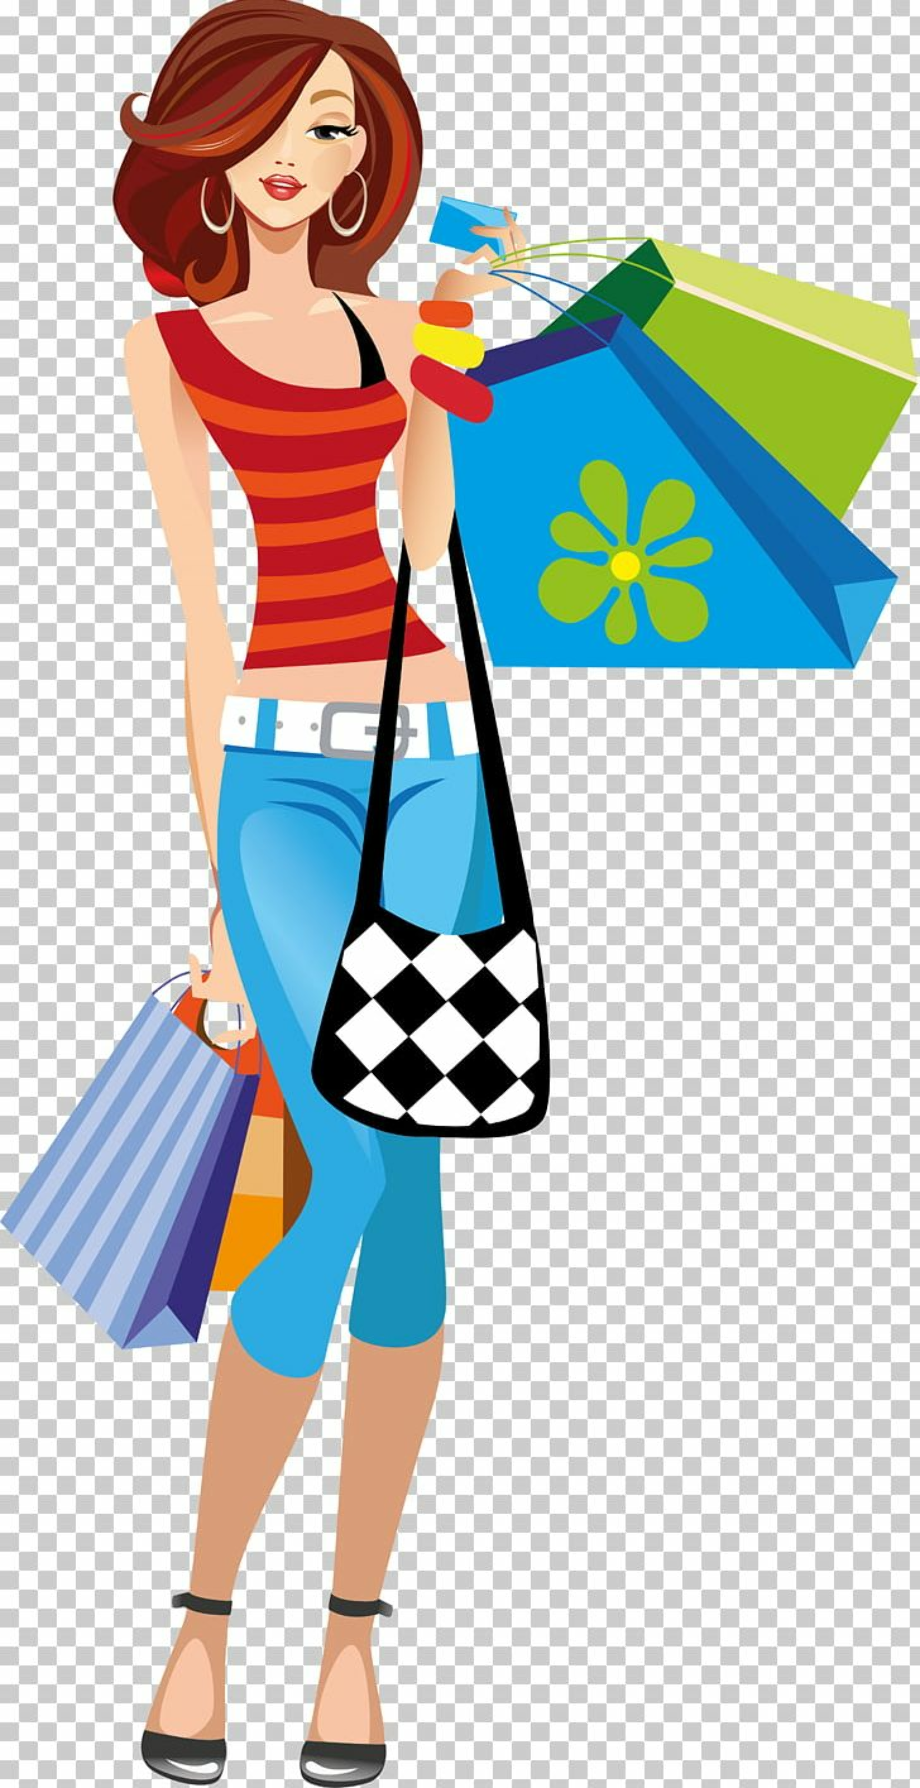 Download High Quality shopping clipart cartoon Transparent PNG Images